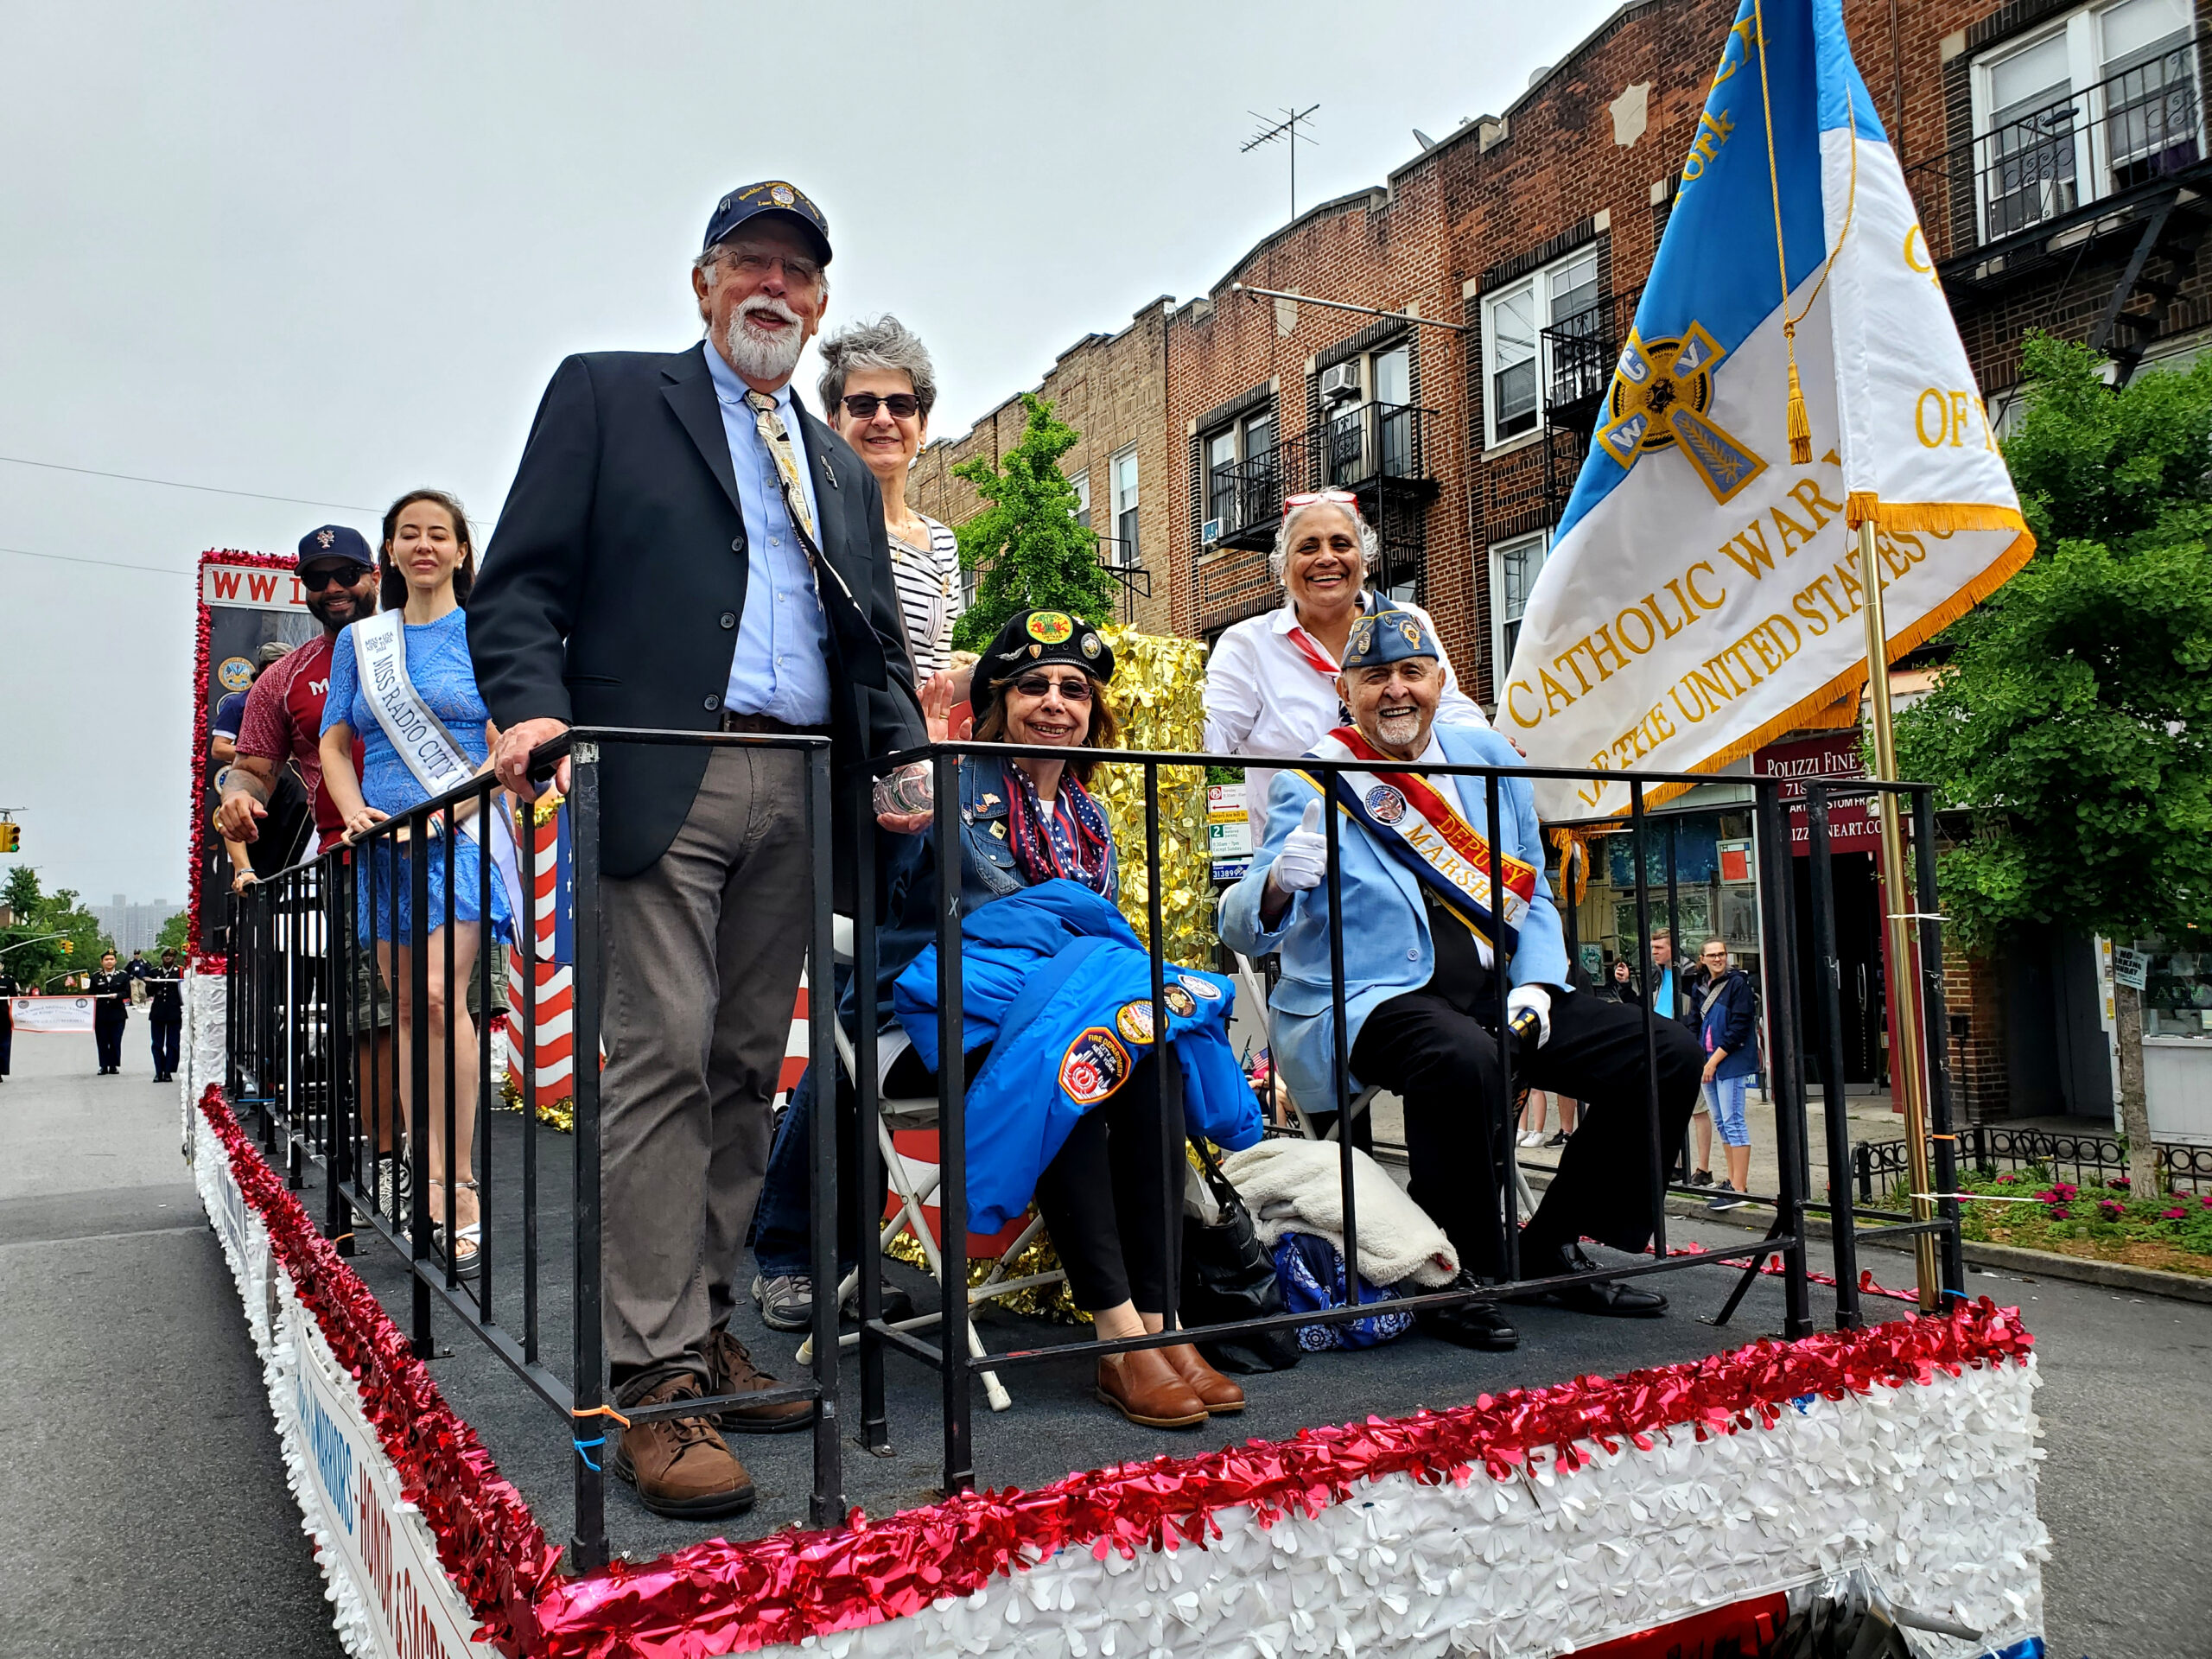 ‘Floating’ up the avenue: Ray Aalbue (wearing tie), chairman of the Brooklyn Memorial Day Parade and executive director of the United Military Veterans of Kings County; Marianne Aalbue; Deputy Marshal Vincent Sampieri, U.S. Navy veteran, Catholic War Veterans (seated); and Connie Ranocchia, parade president (standing). Eagle photos by Arthur De Gaeta